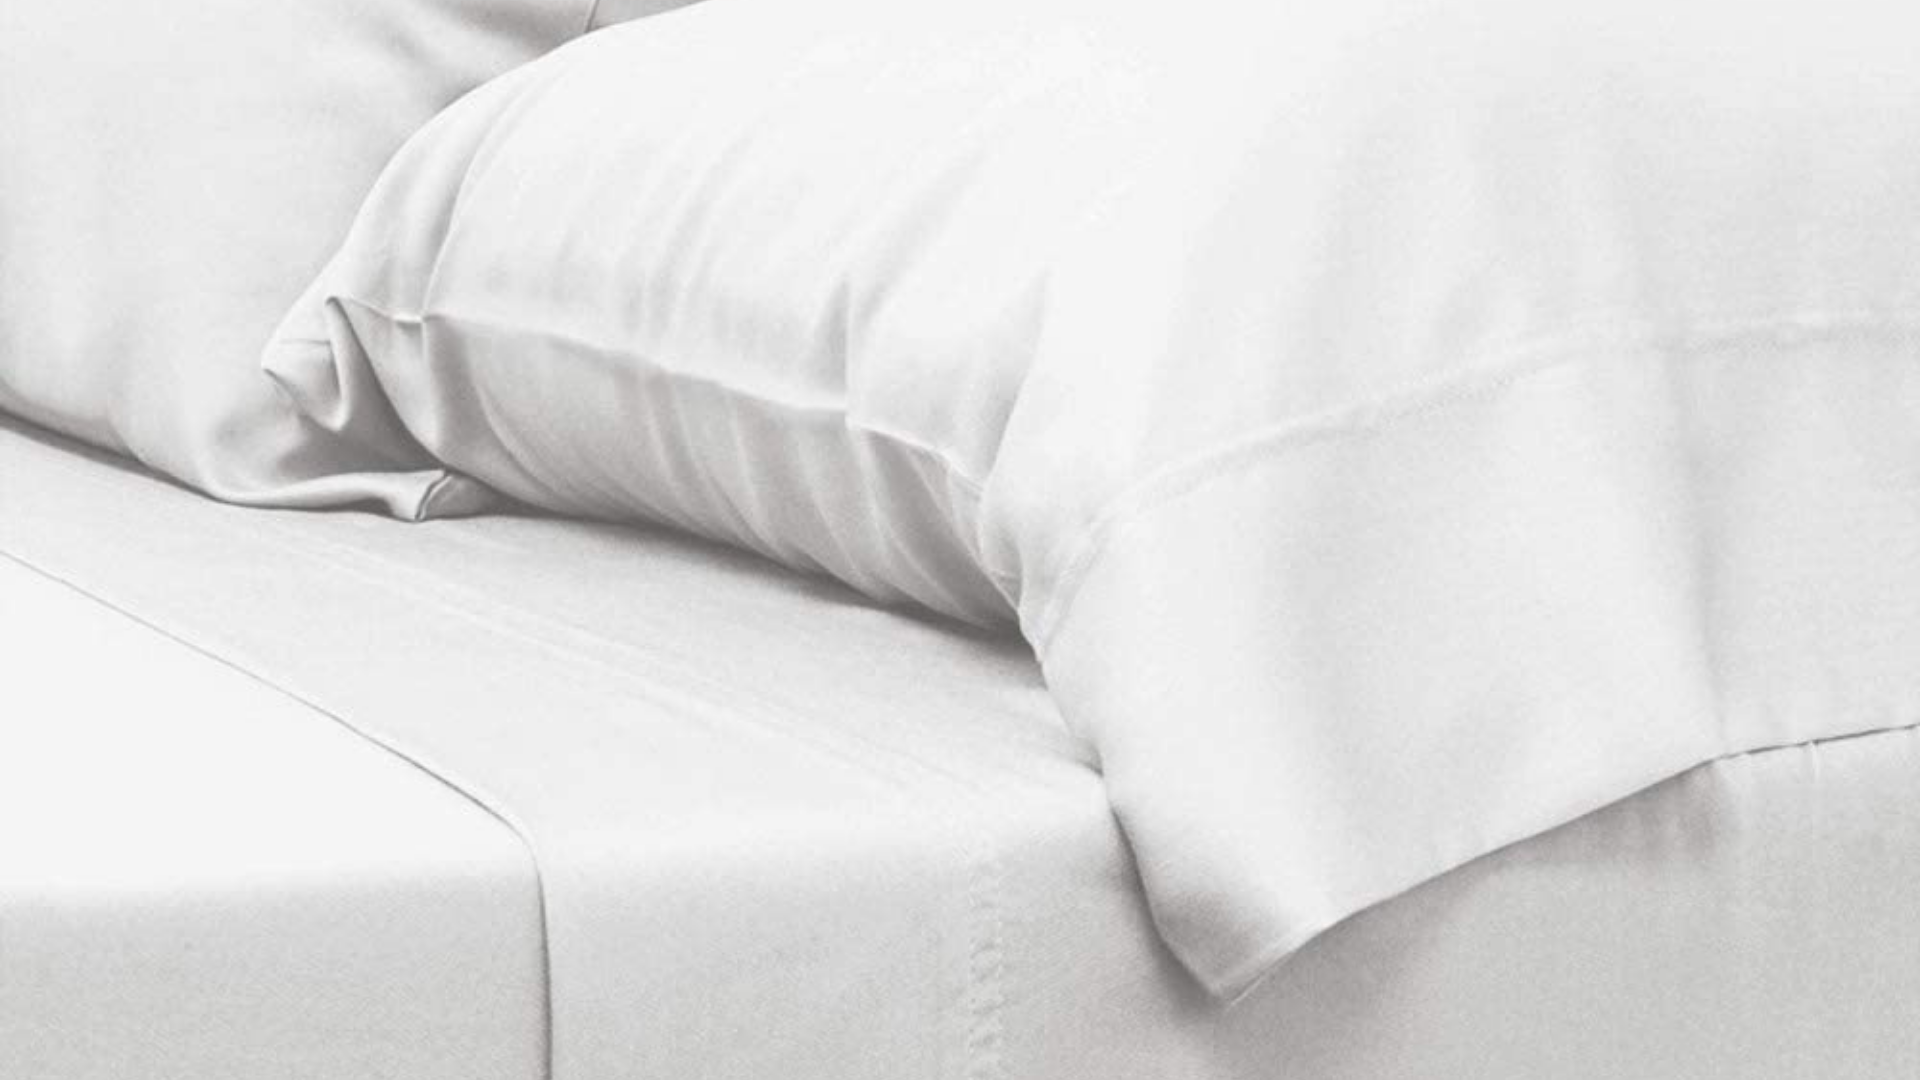 best sheets for winter